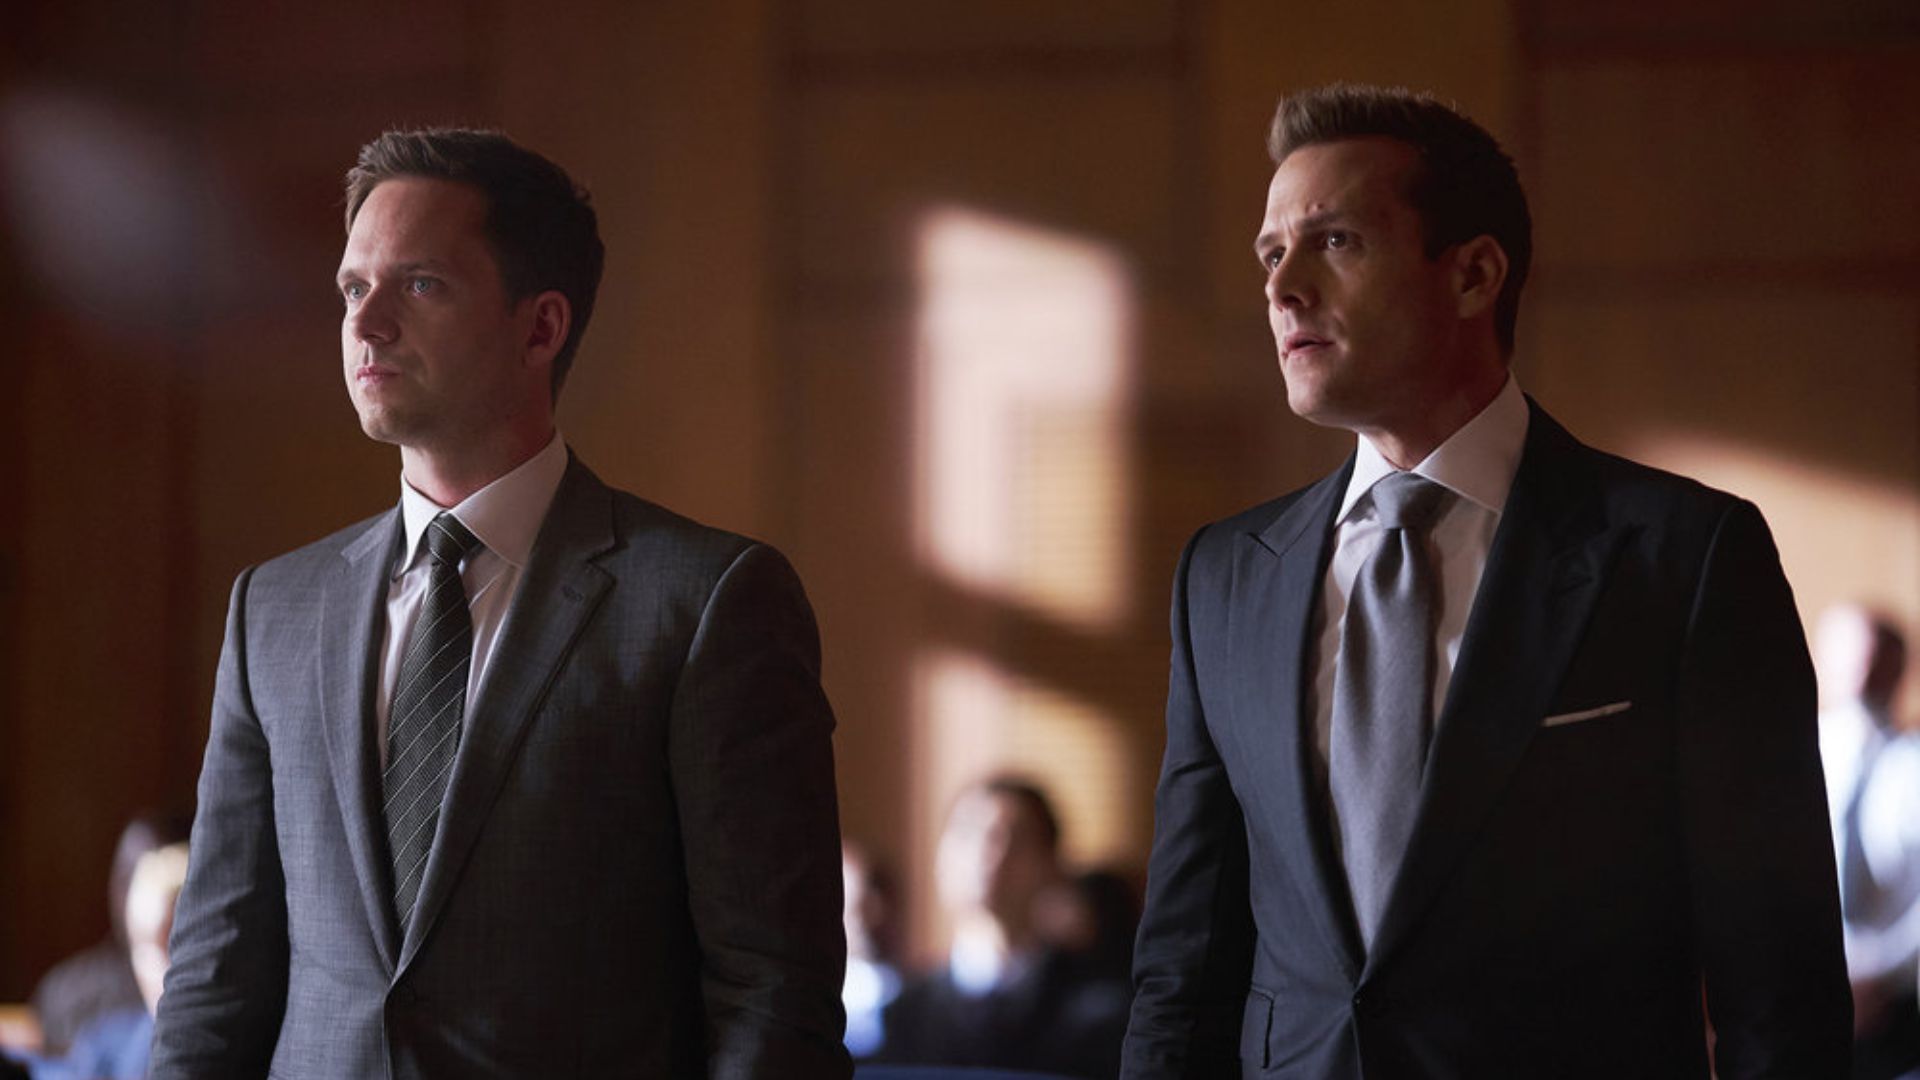 Suits L.A': A 'Suits' Follow-Up Has Been Confirmed